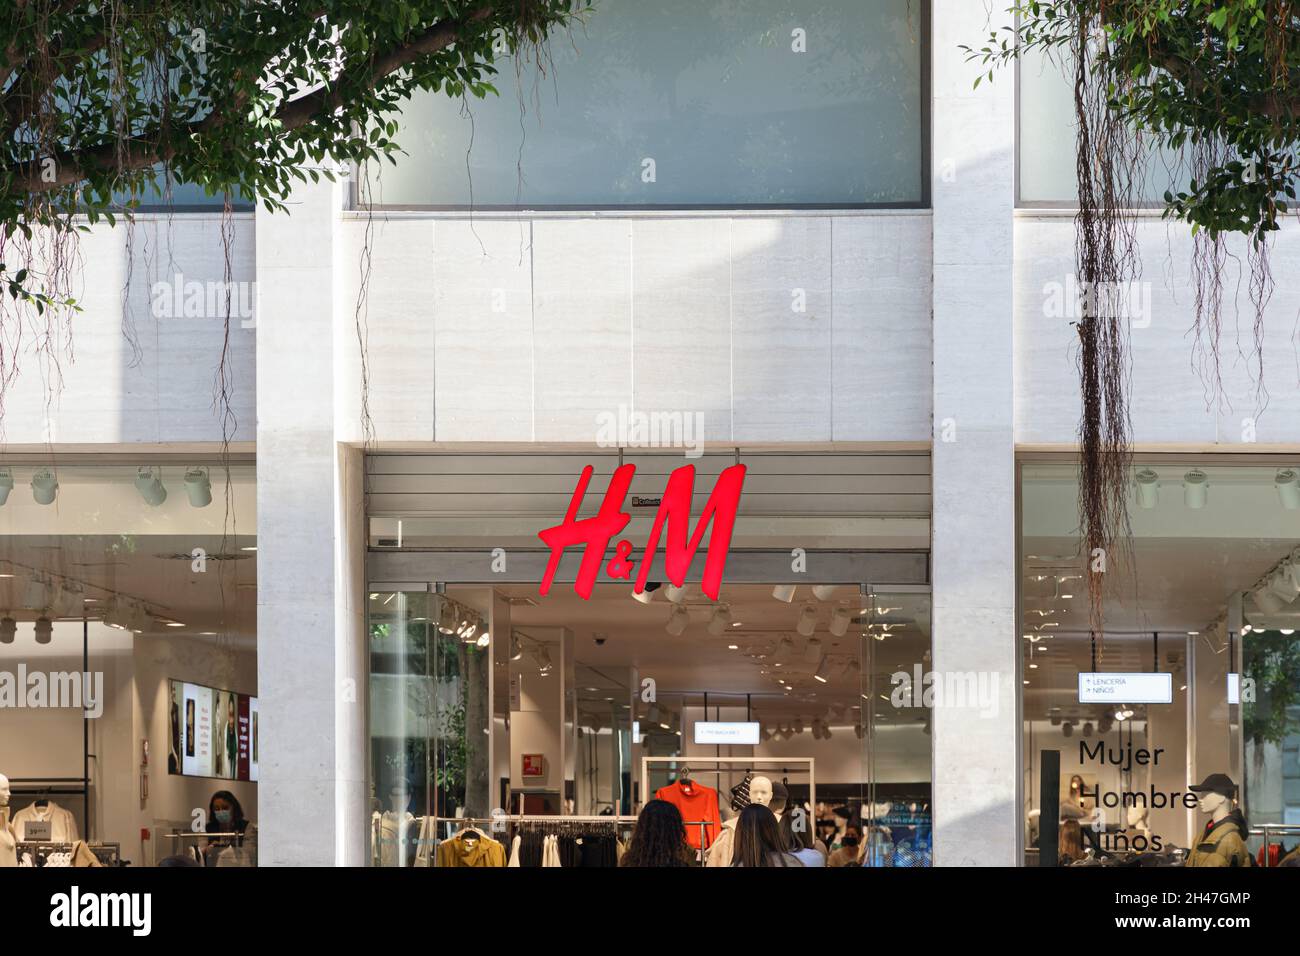 Page 3 - H&m Logo Shop High Resolution Stock Photography and Images - Alamy